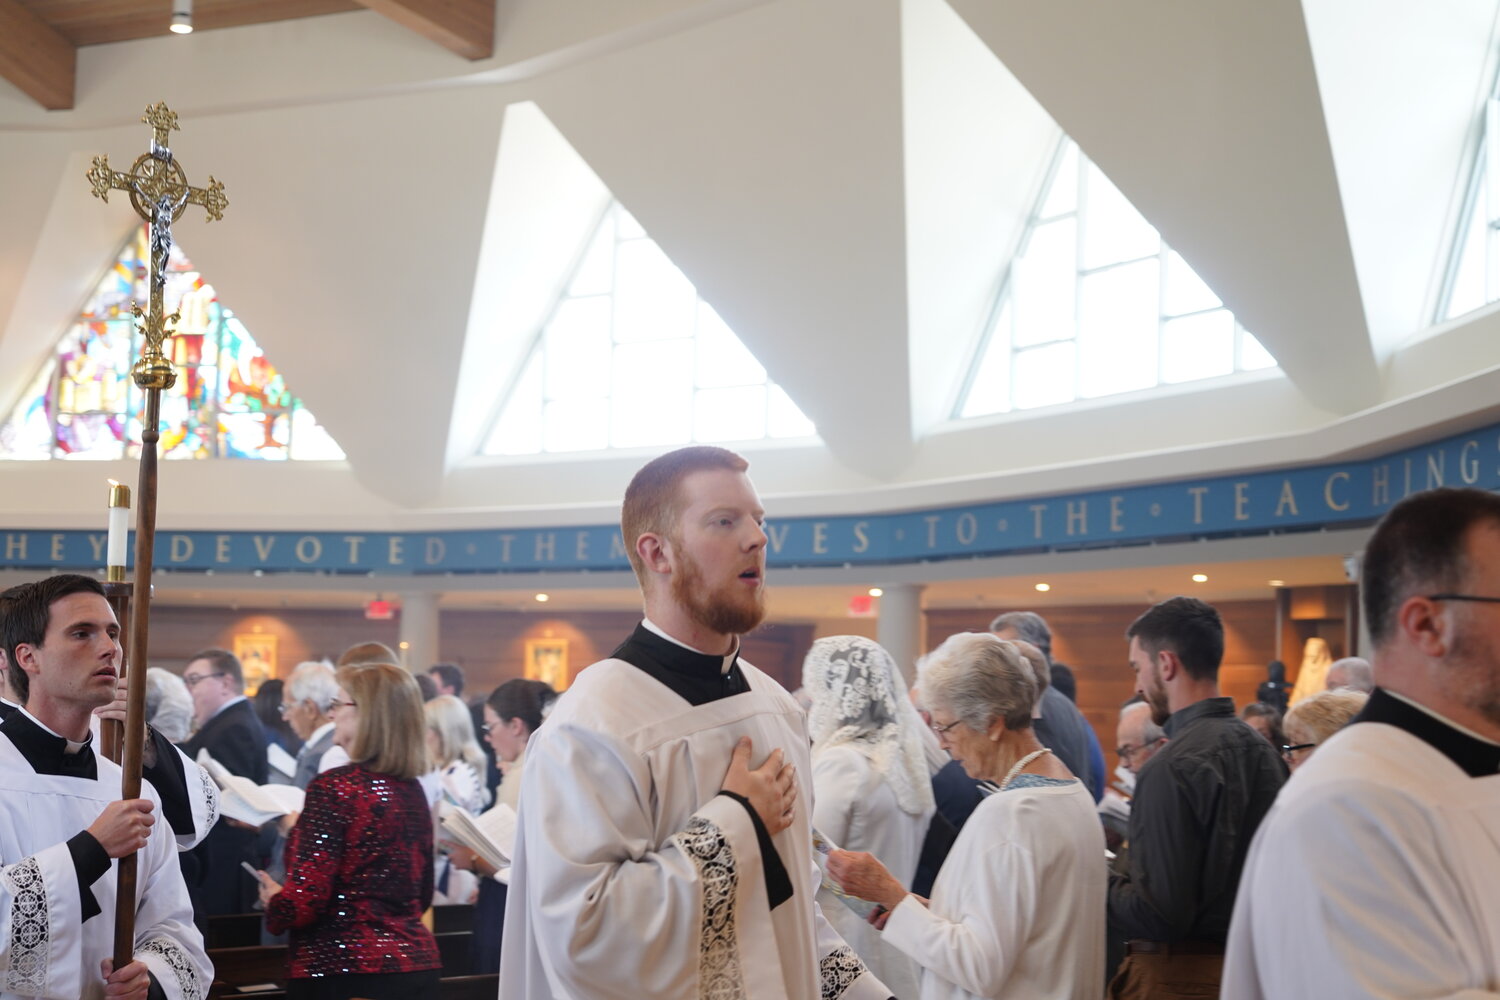 Christopher Hoffmann processes out of the Cathedral of St. Joseph with fellow seminarians on the day of the Cathedral’s Rededication Mass on May 5, 2023.